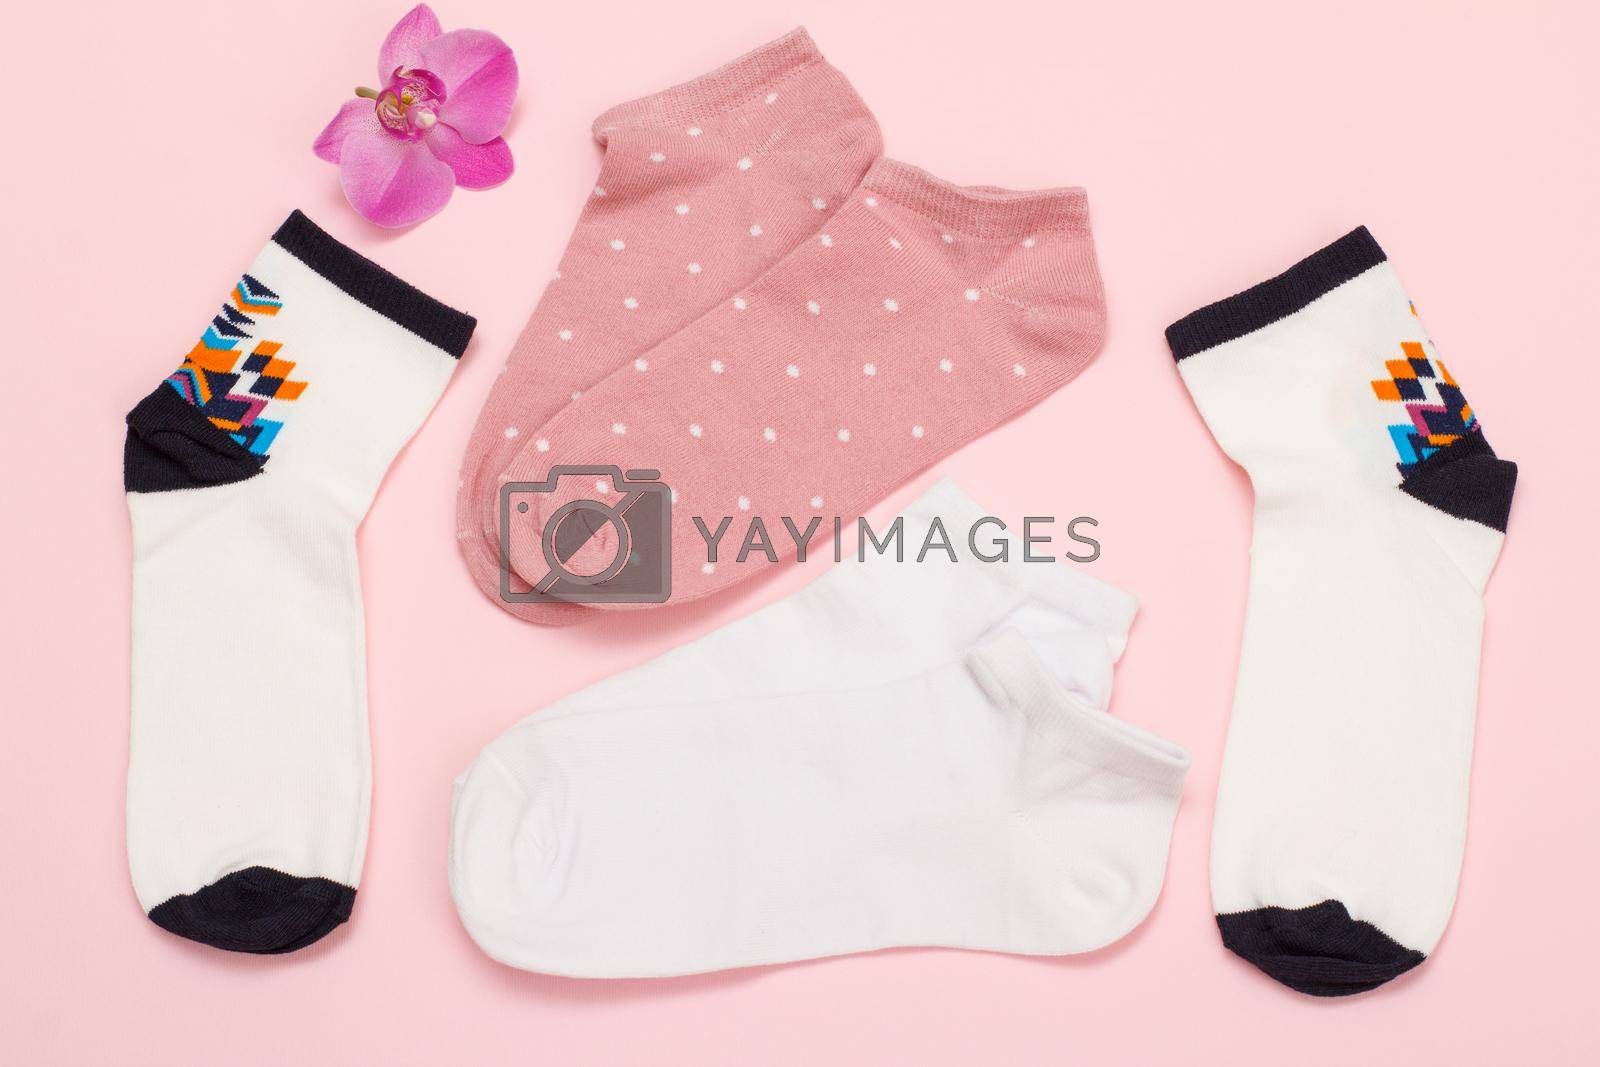 Royalty free image of Women socks on pink background. Top view. by mvg6894